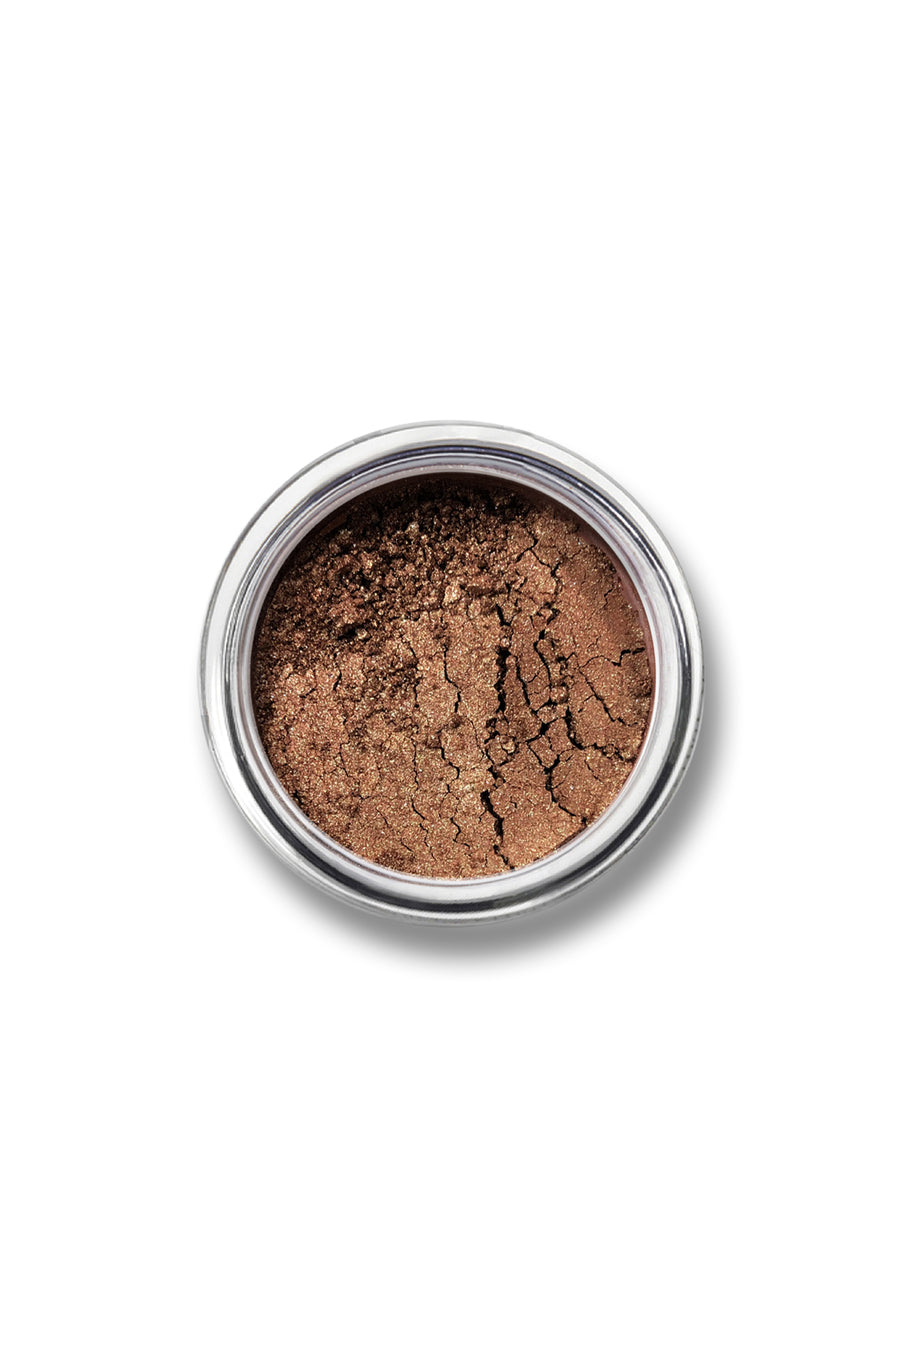 Shimmer Eyeshadow #23 - Shimmery Taupe - Blend Mineral Cosmetics